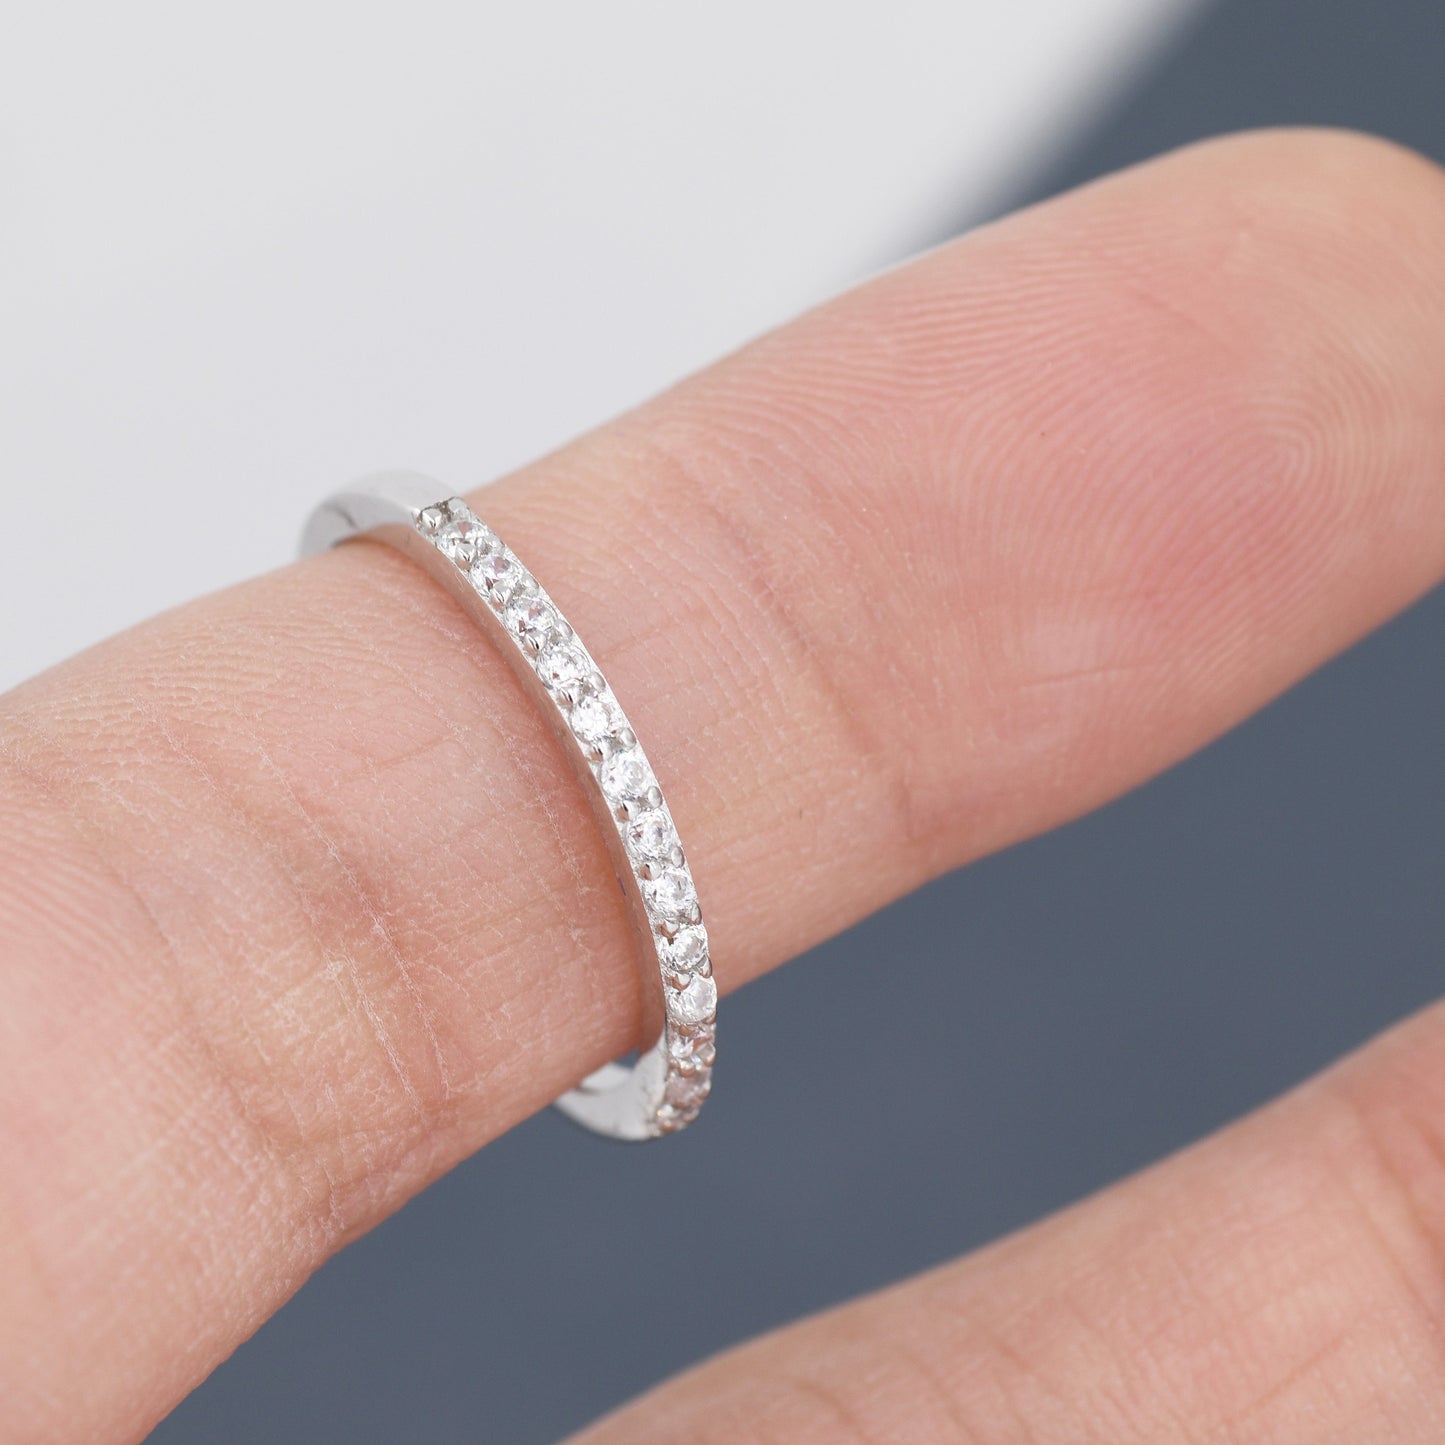 Half Eternity CZ Ring in Sterling Silver,  Silver or Gold, Sparkly CZ Skinny Ring, Minimalist Stacking Ring US 5 - 8